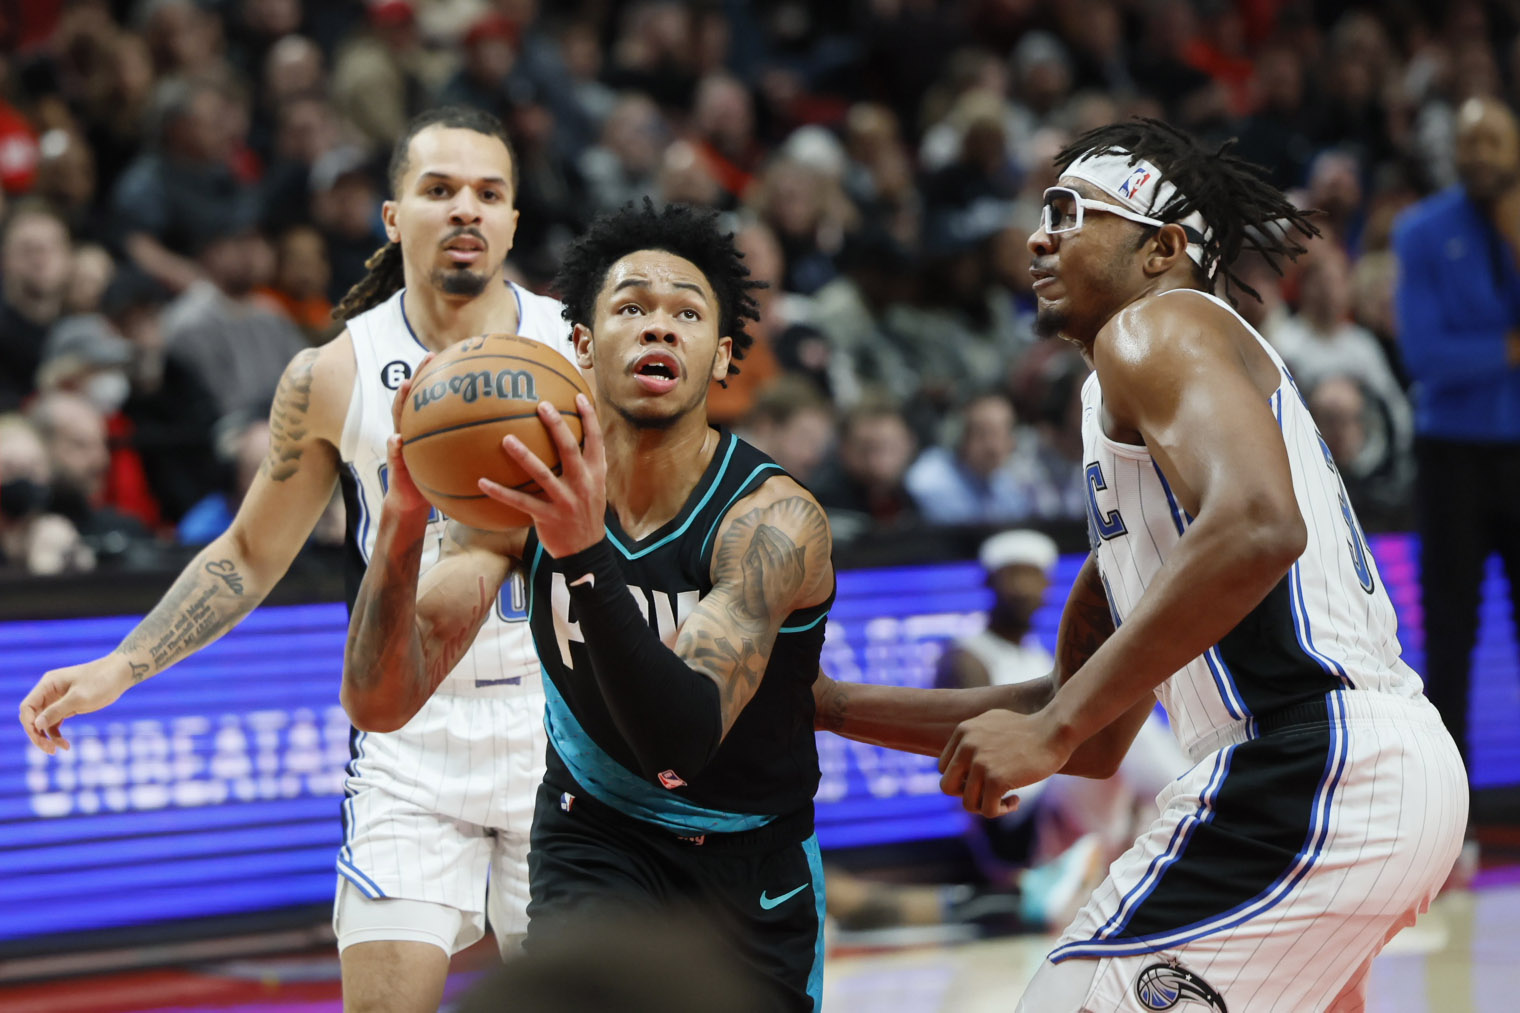 Jan 10, 2023; Portland, Oregon, USA; Portland Trail Blazers shooting guard Anfernee Simons (1) drives to the basket against Orlando Magic center Wendell Carter Jr. (34, right) during the first half at Moda Center. Mandatory Credit: Soobum Im-USA TODAY Sports